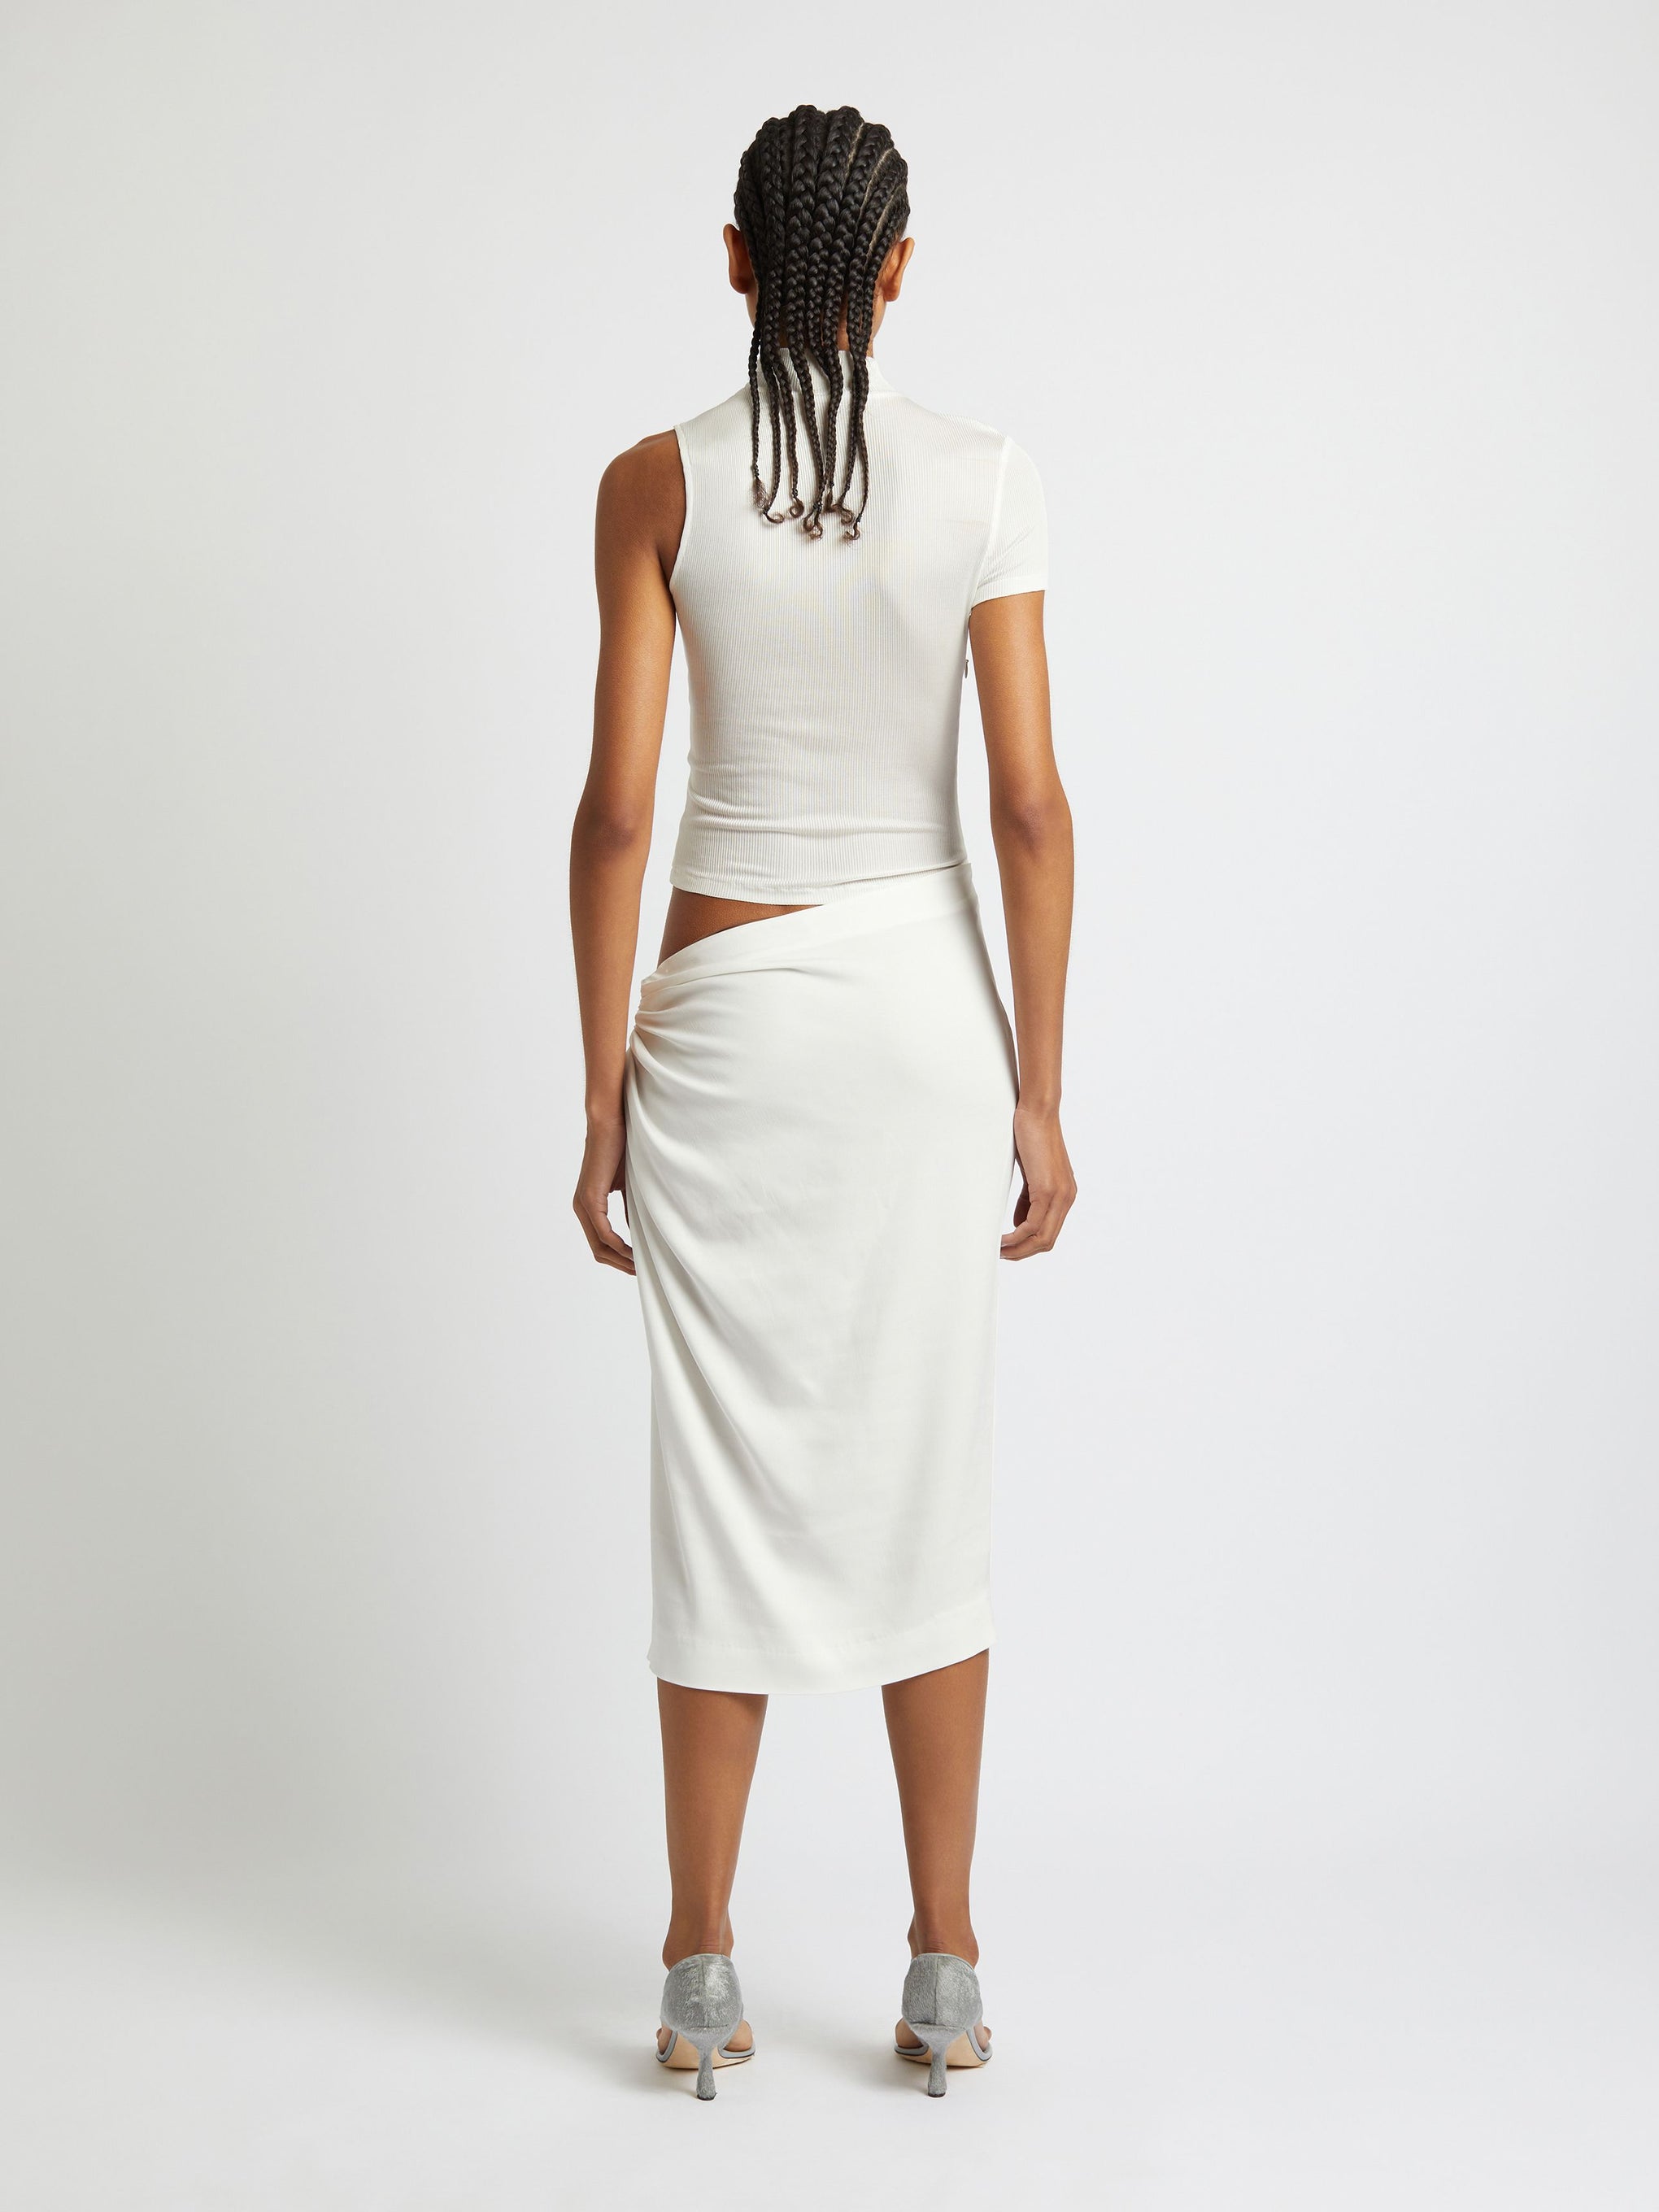 The Christopher Esber Fusion Tee Dress in White available at The New Trend Australia